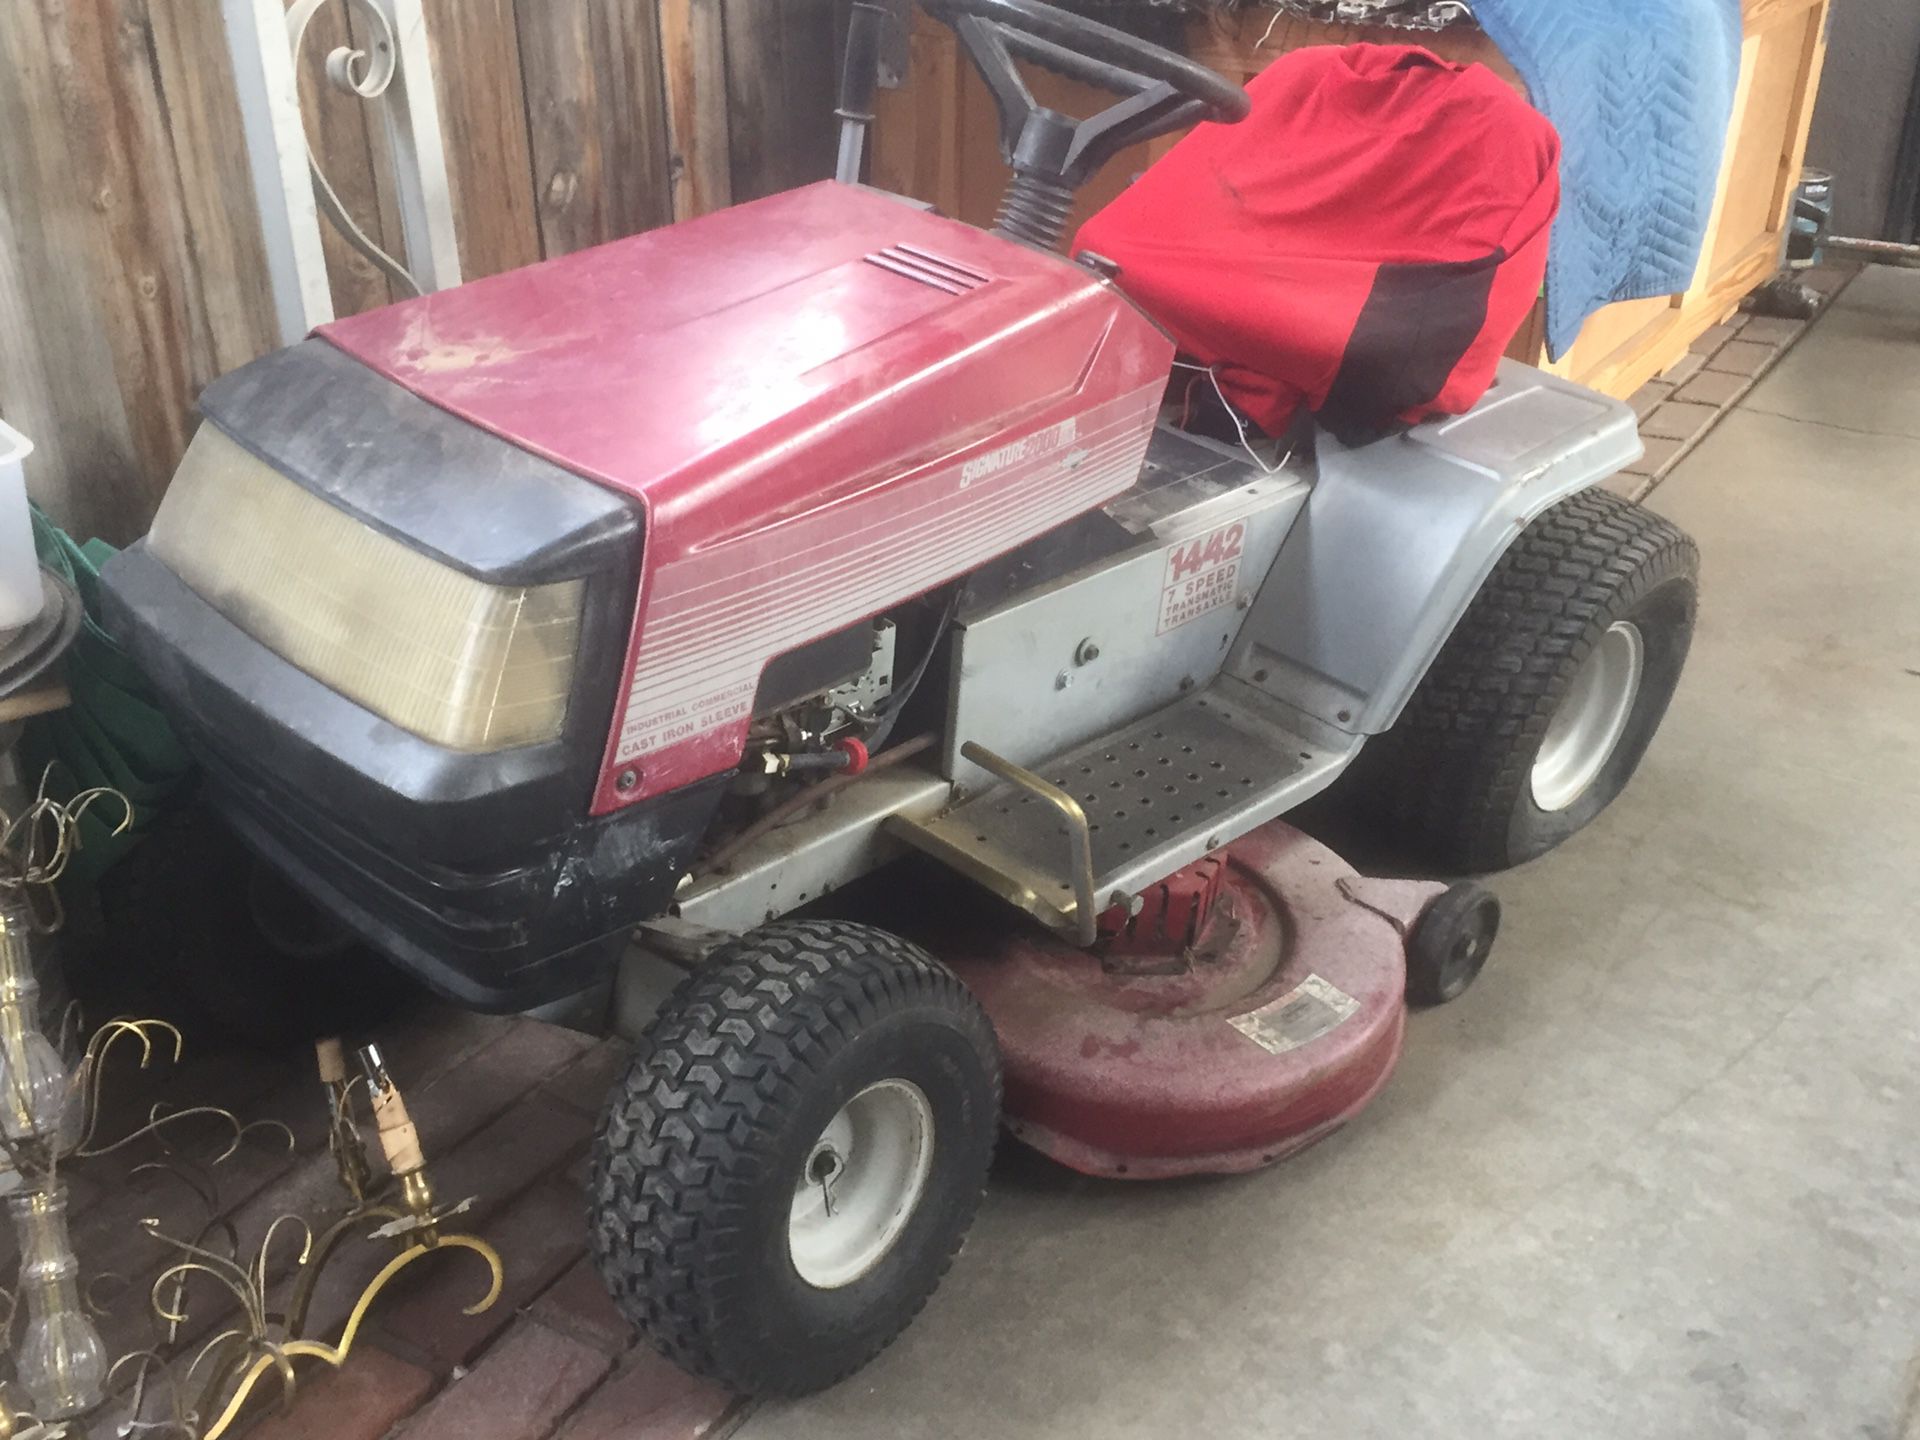 Riding mower for sale asking $250 or bets offer